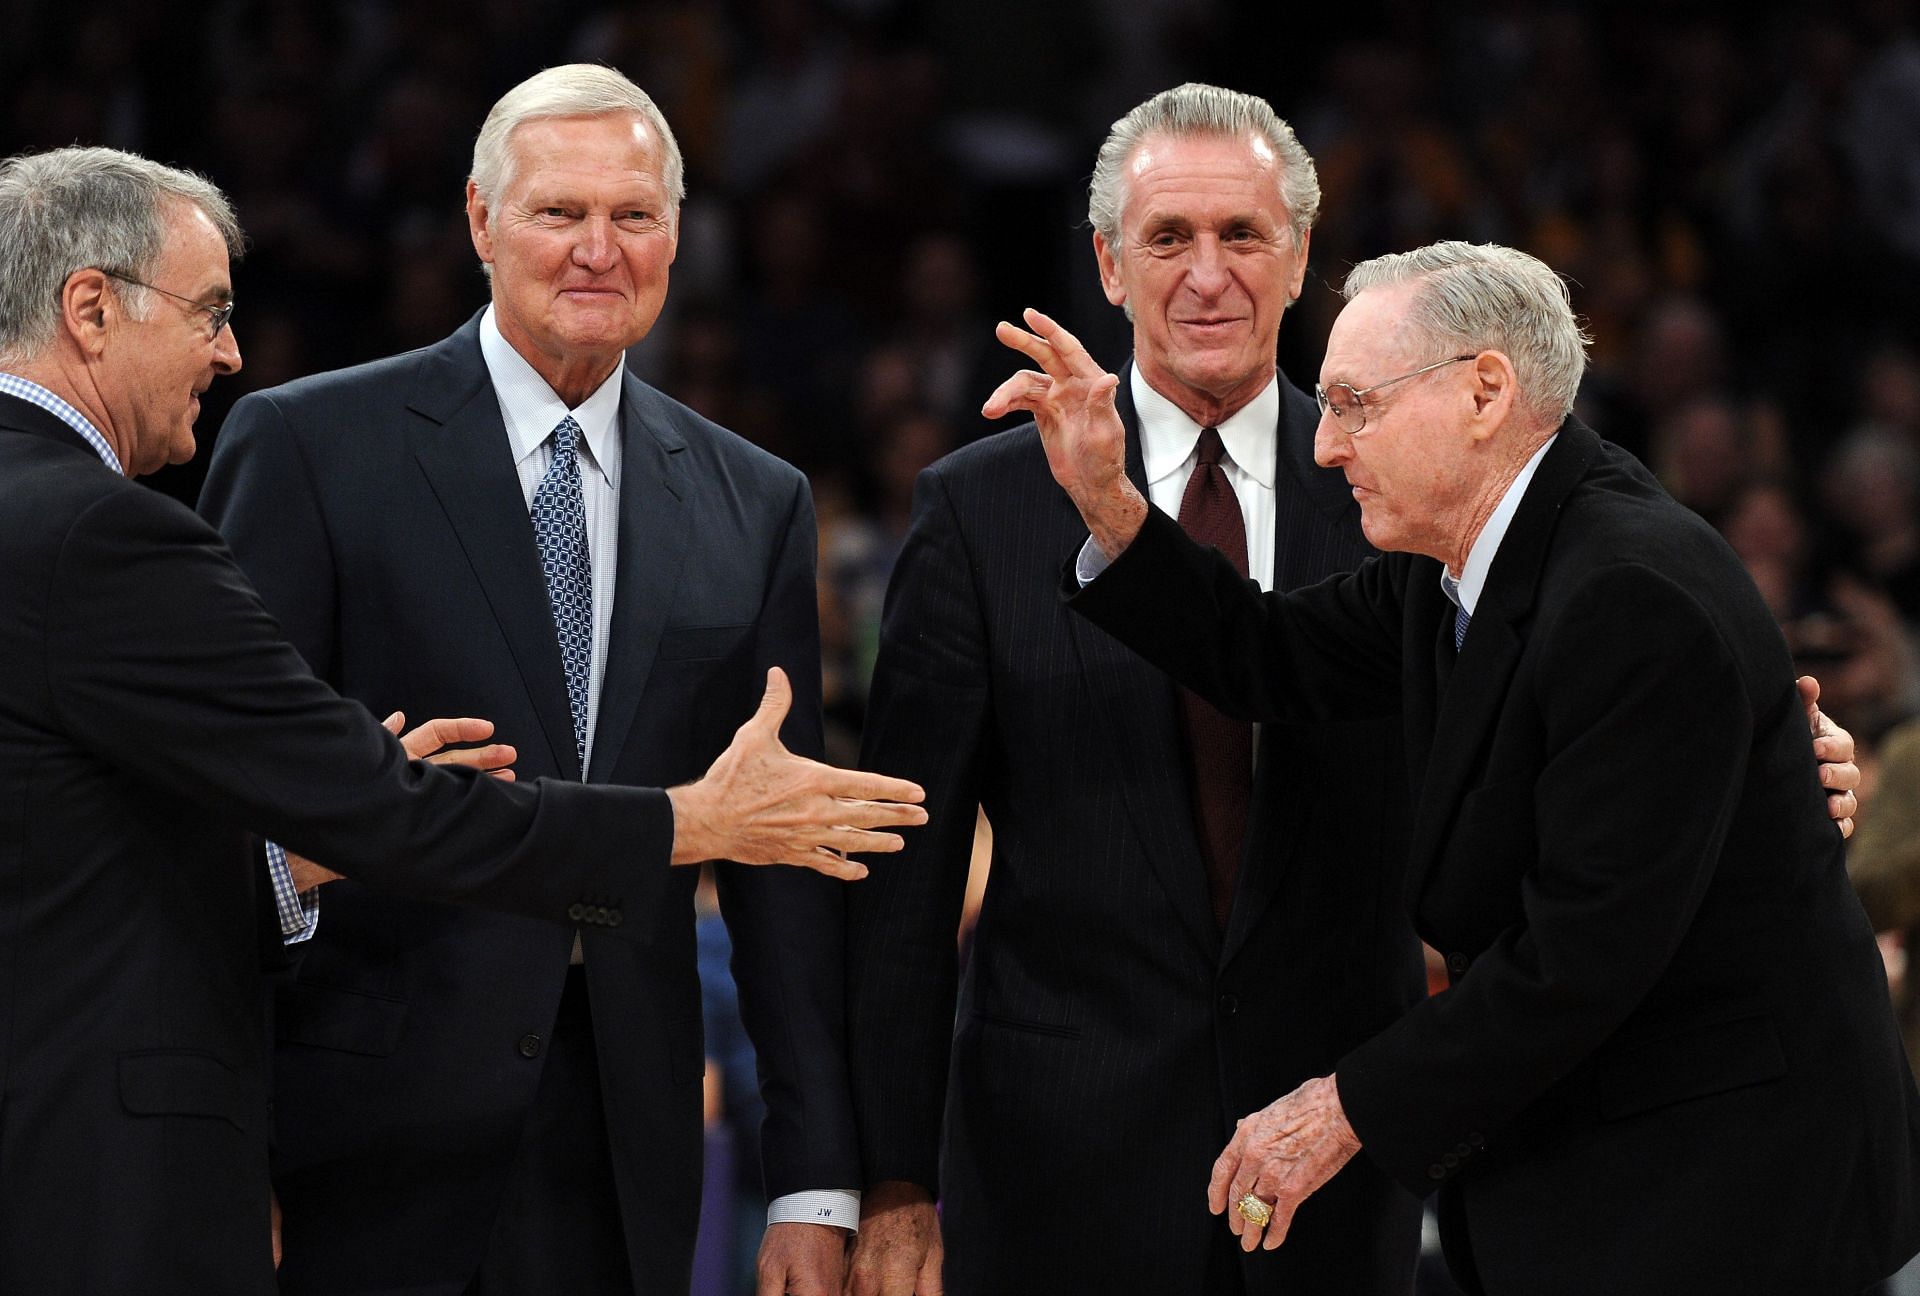 Bill Sharman receives a handshake from Gail Goodrich in front of Jerry West and Pat Riley as the 1972 NBA Championshipi team is honored at halftime during the game between the Houston Rockets and the Los Angeles Lakers at Staples Center on April 6, 2012 in Los Angeles, California.